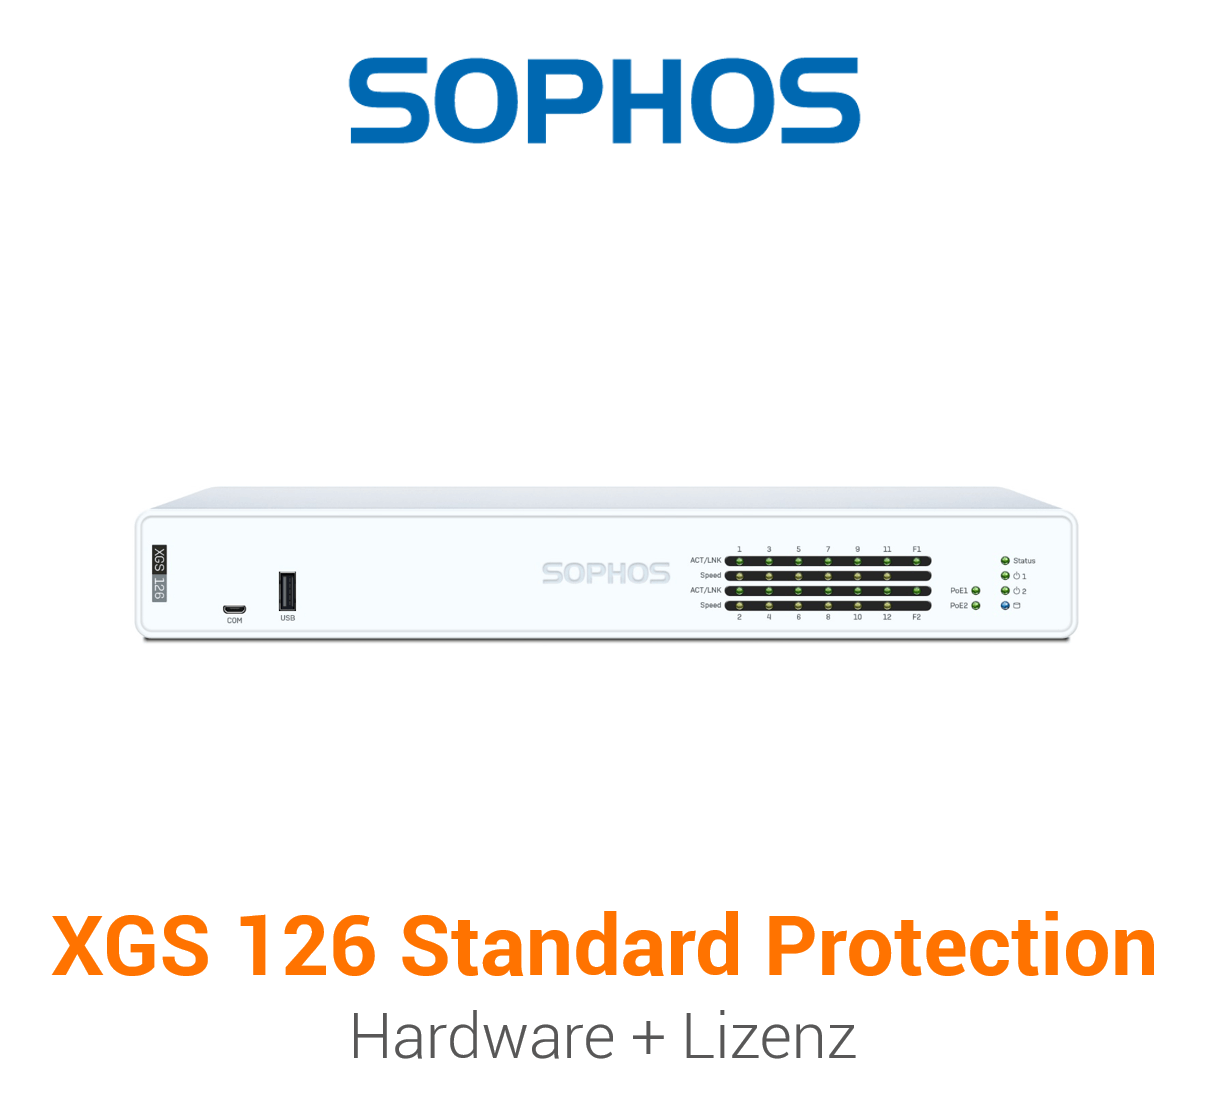 Sophos XGS 126 mit Standard Protection